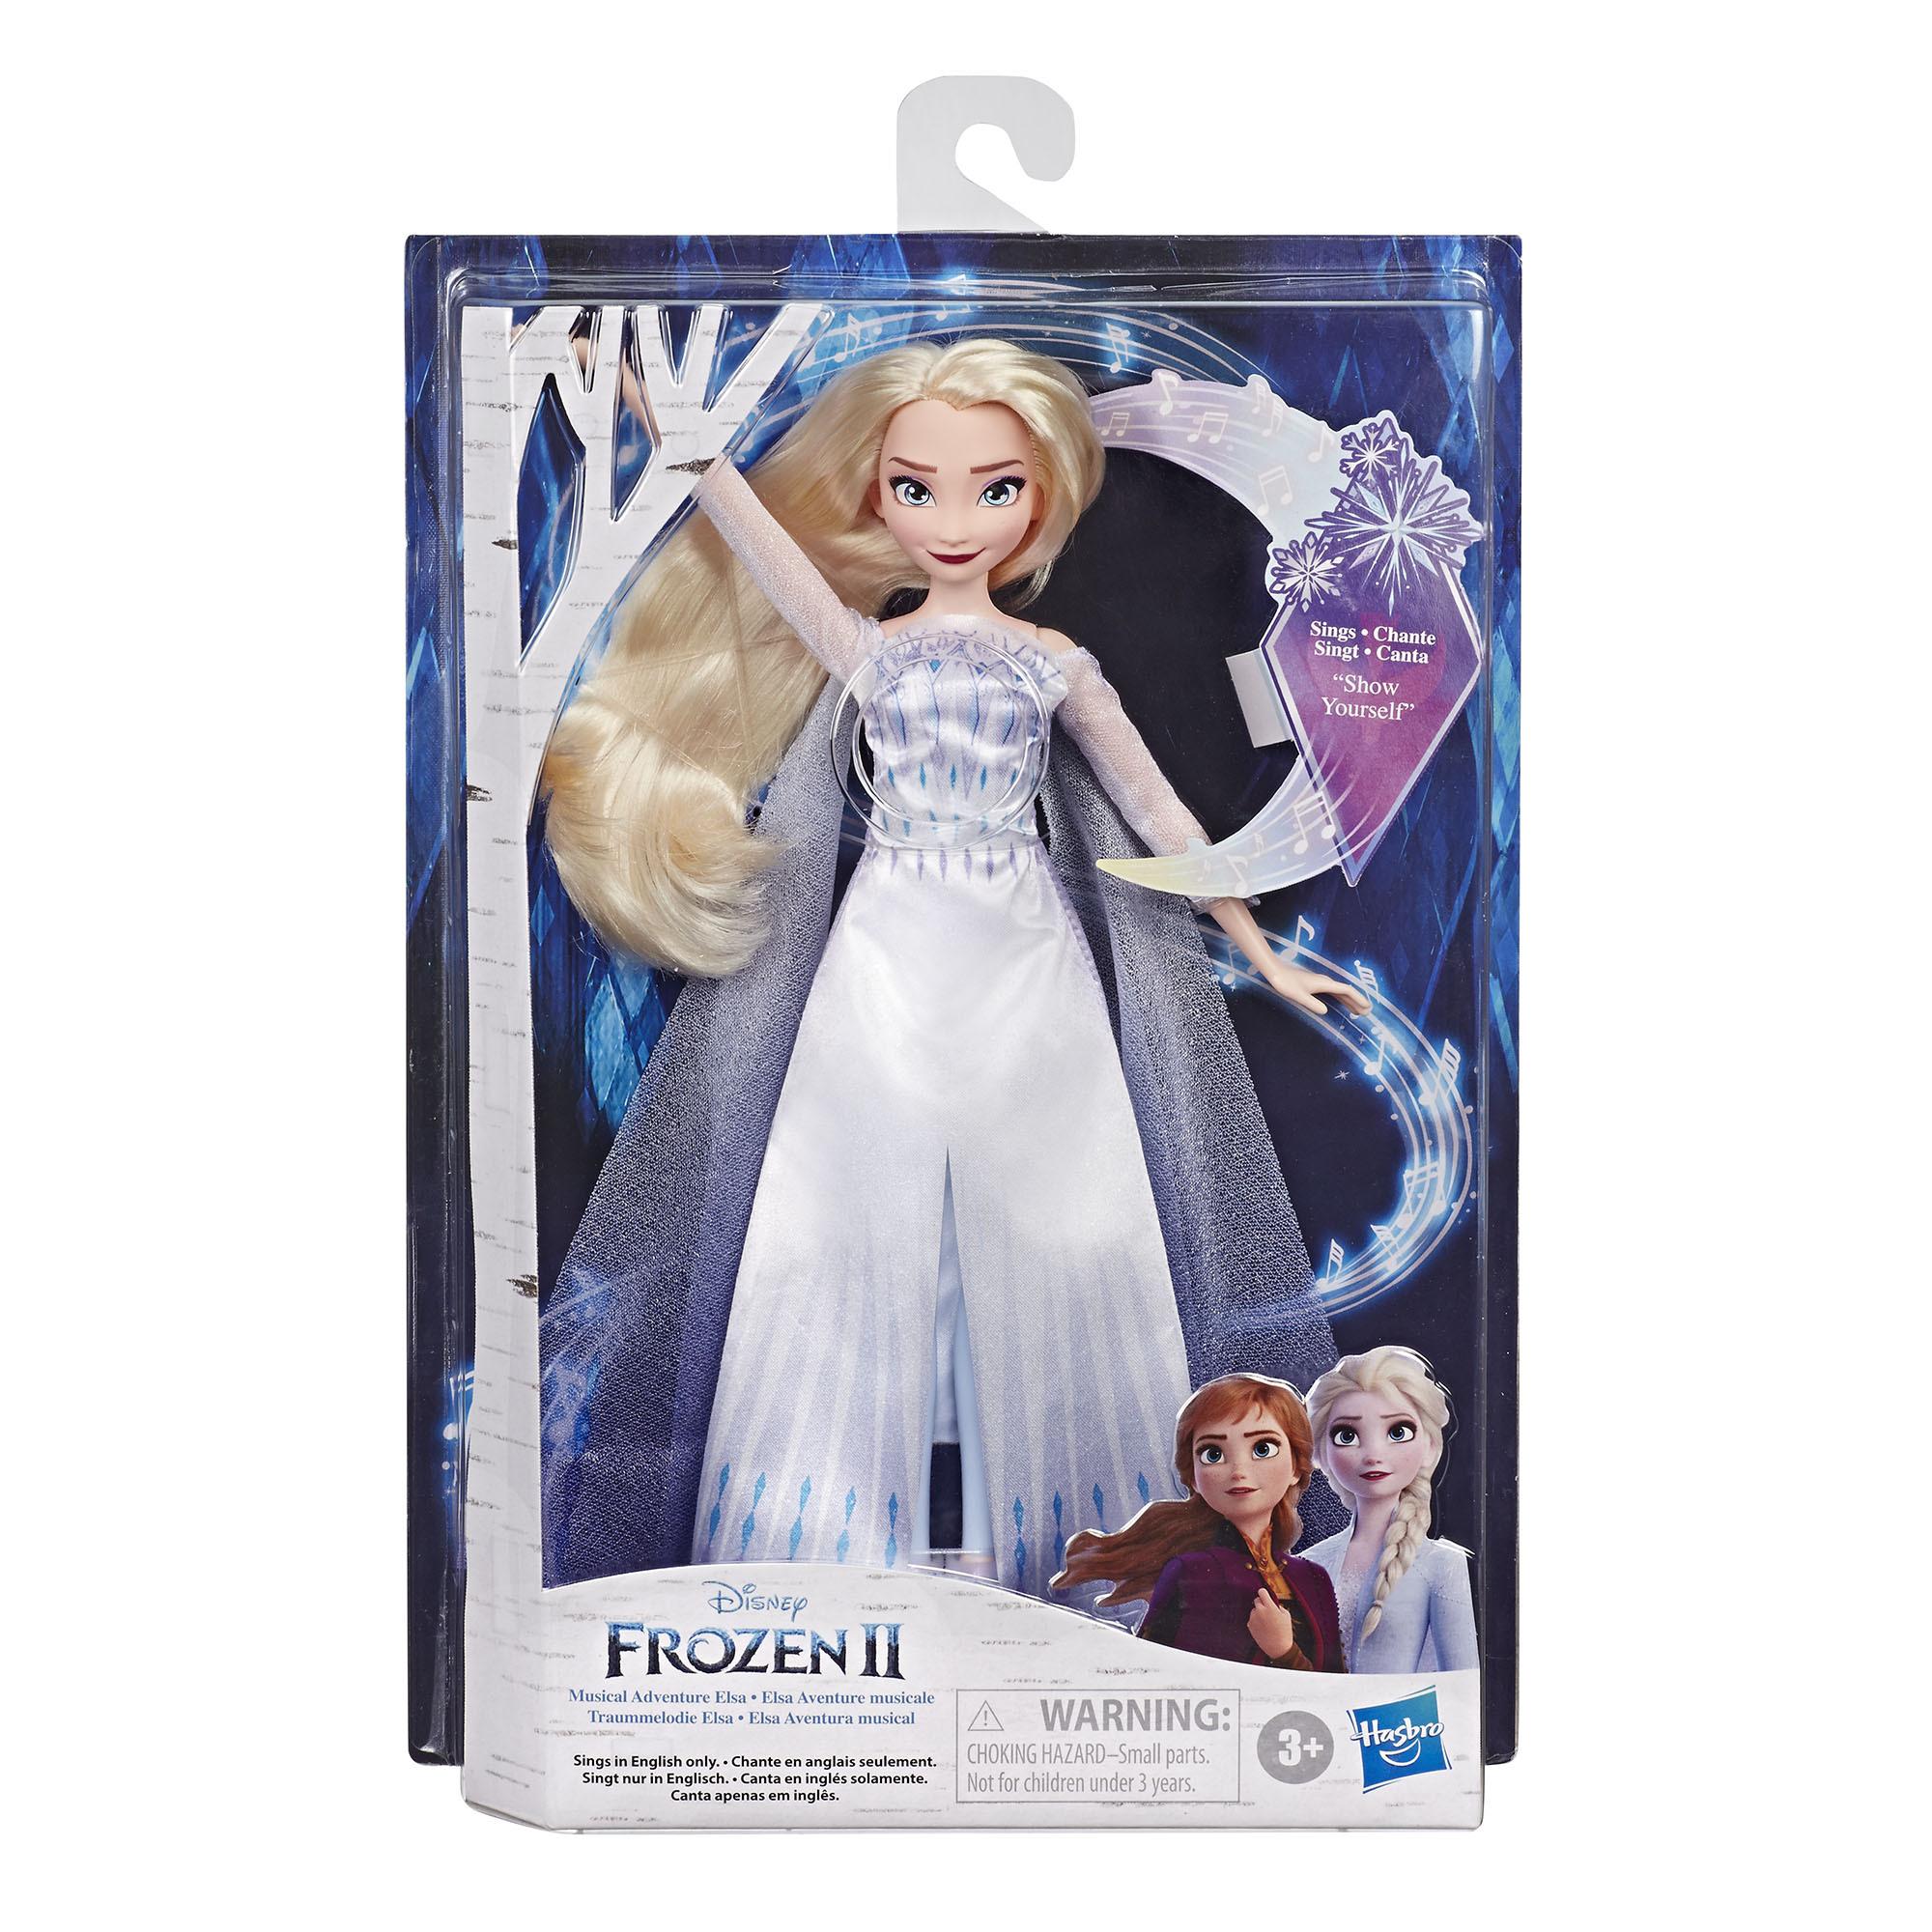 Disney Frozen 2 Magic in Motion Queen Elsa Doll Sings Show Yourself 2020 Toy for sale online 